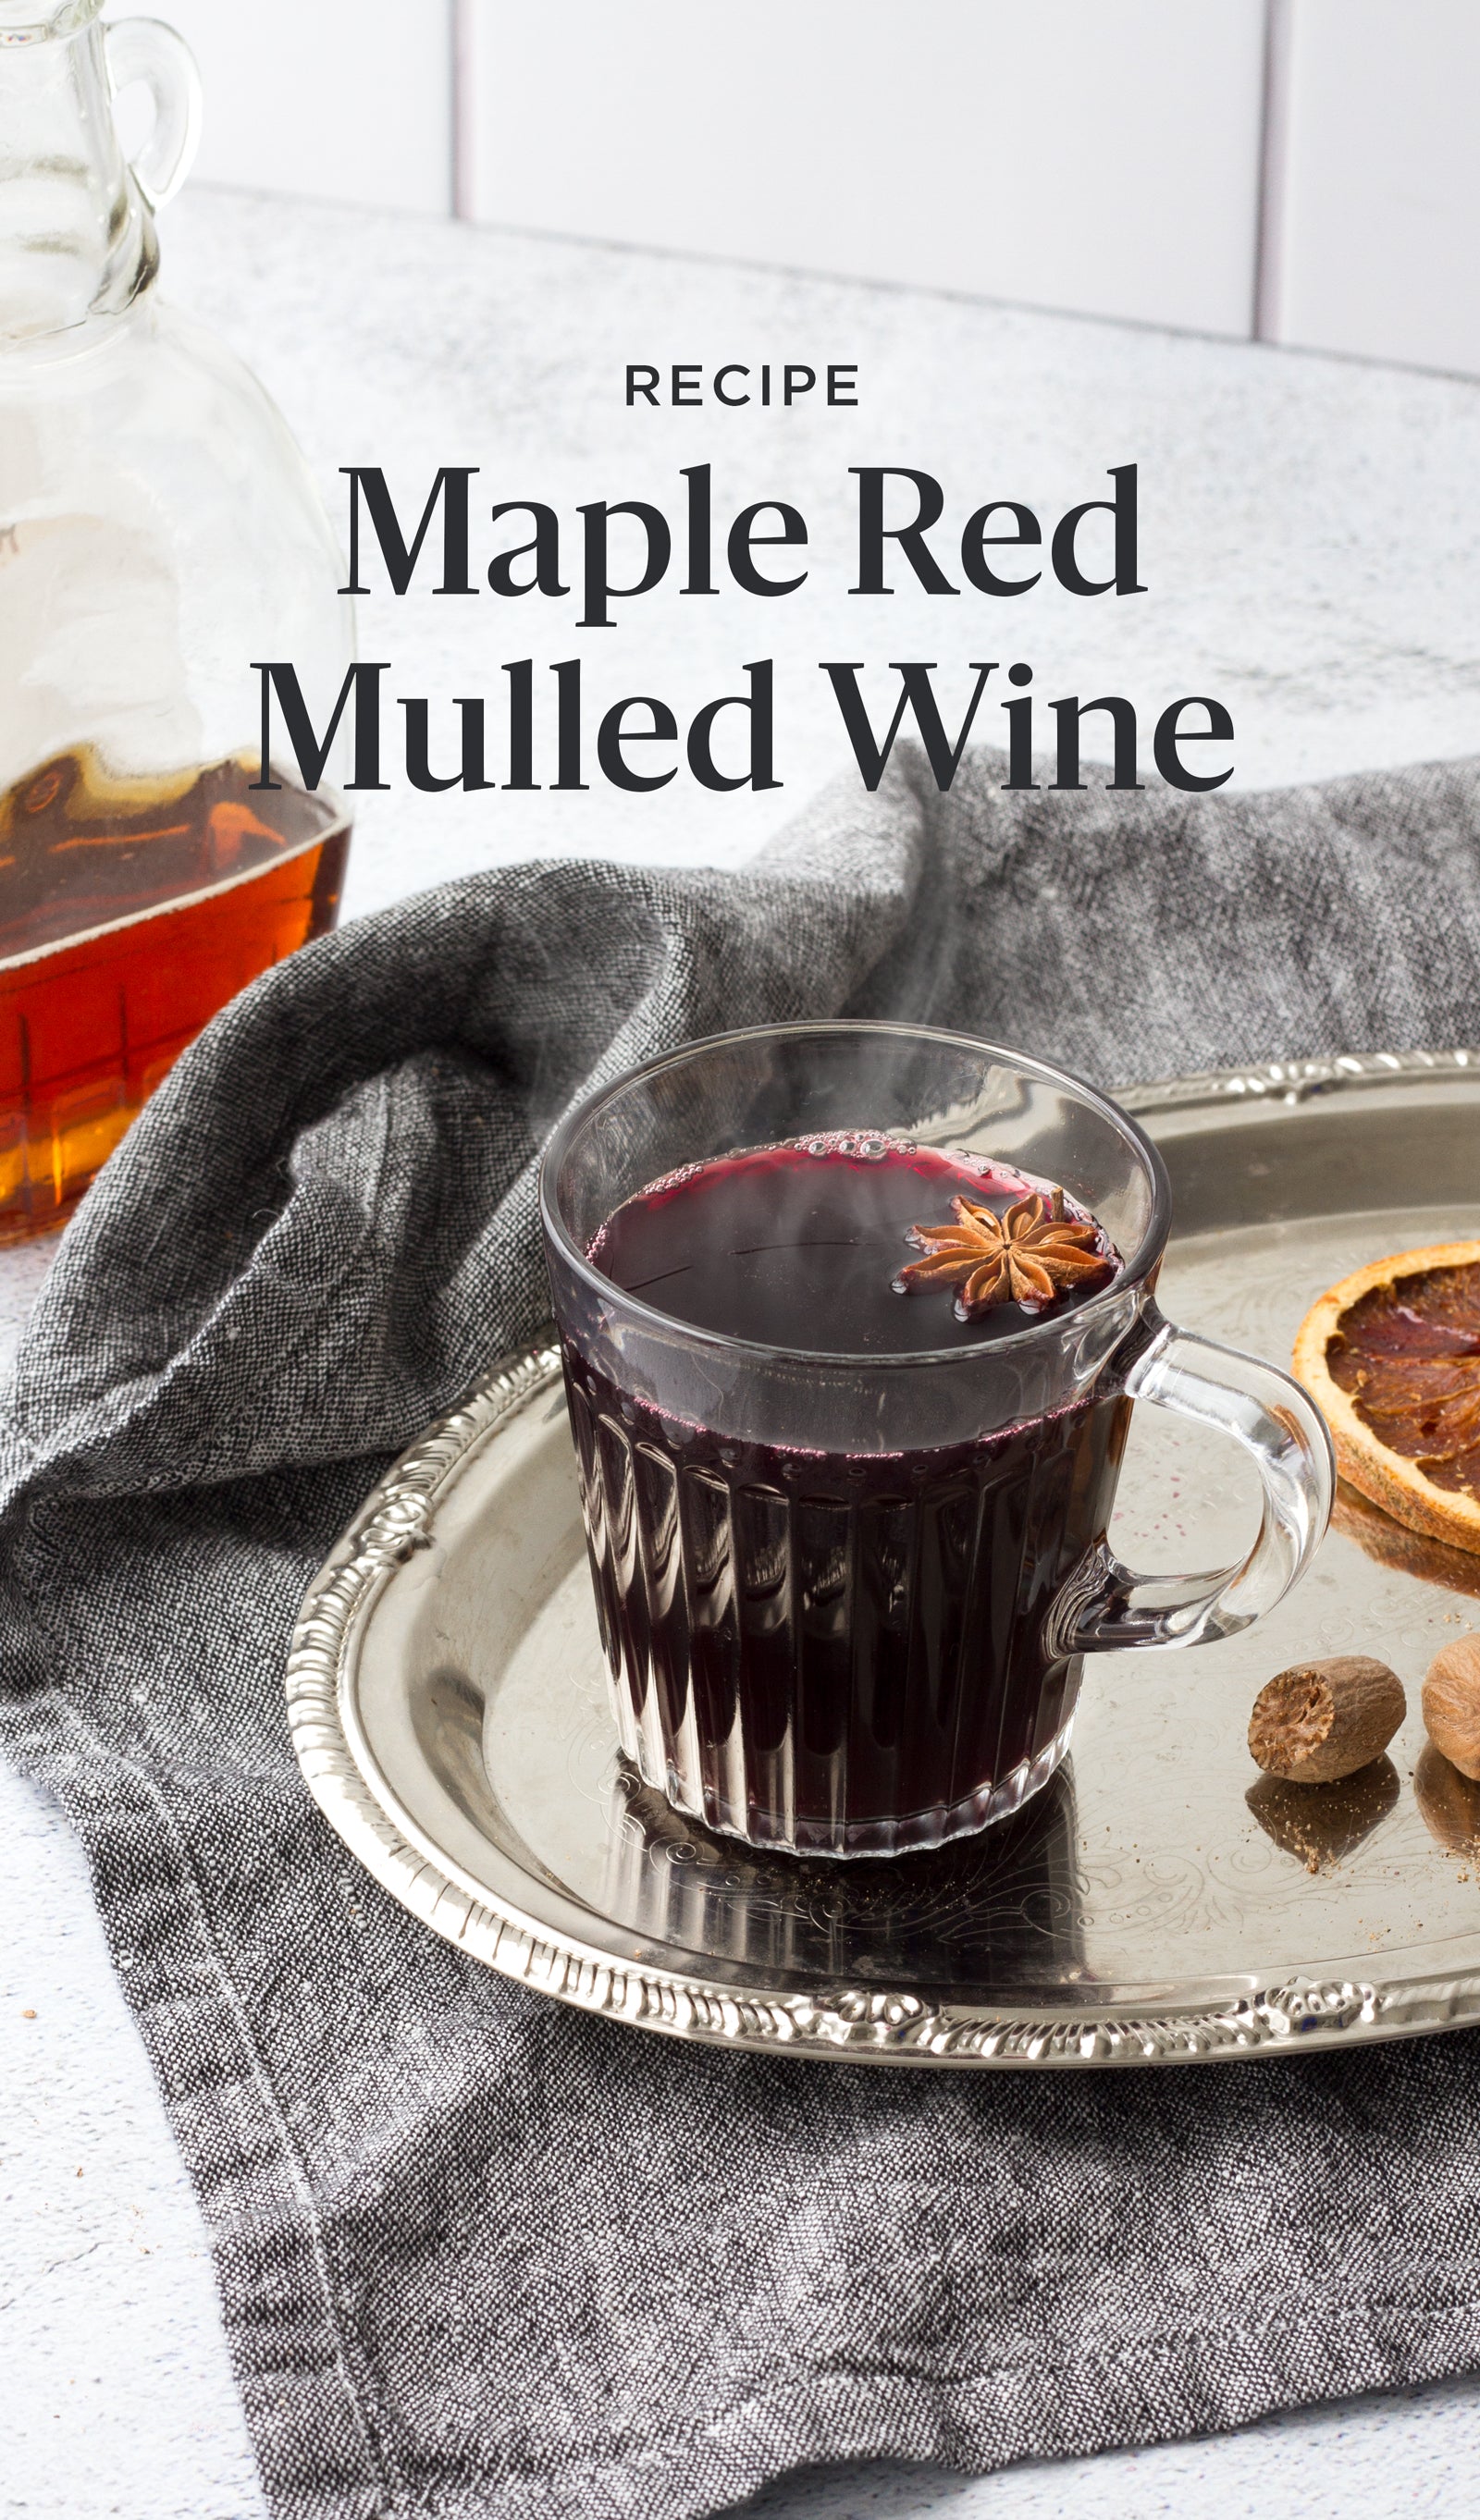 Maple red mulled wine in a mug, recipe for Pinterest